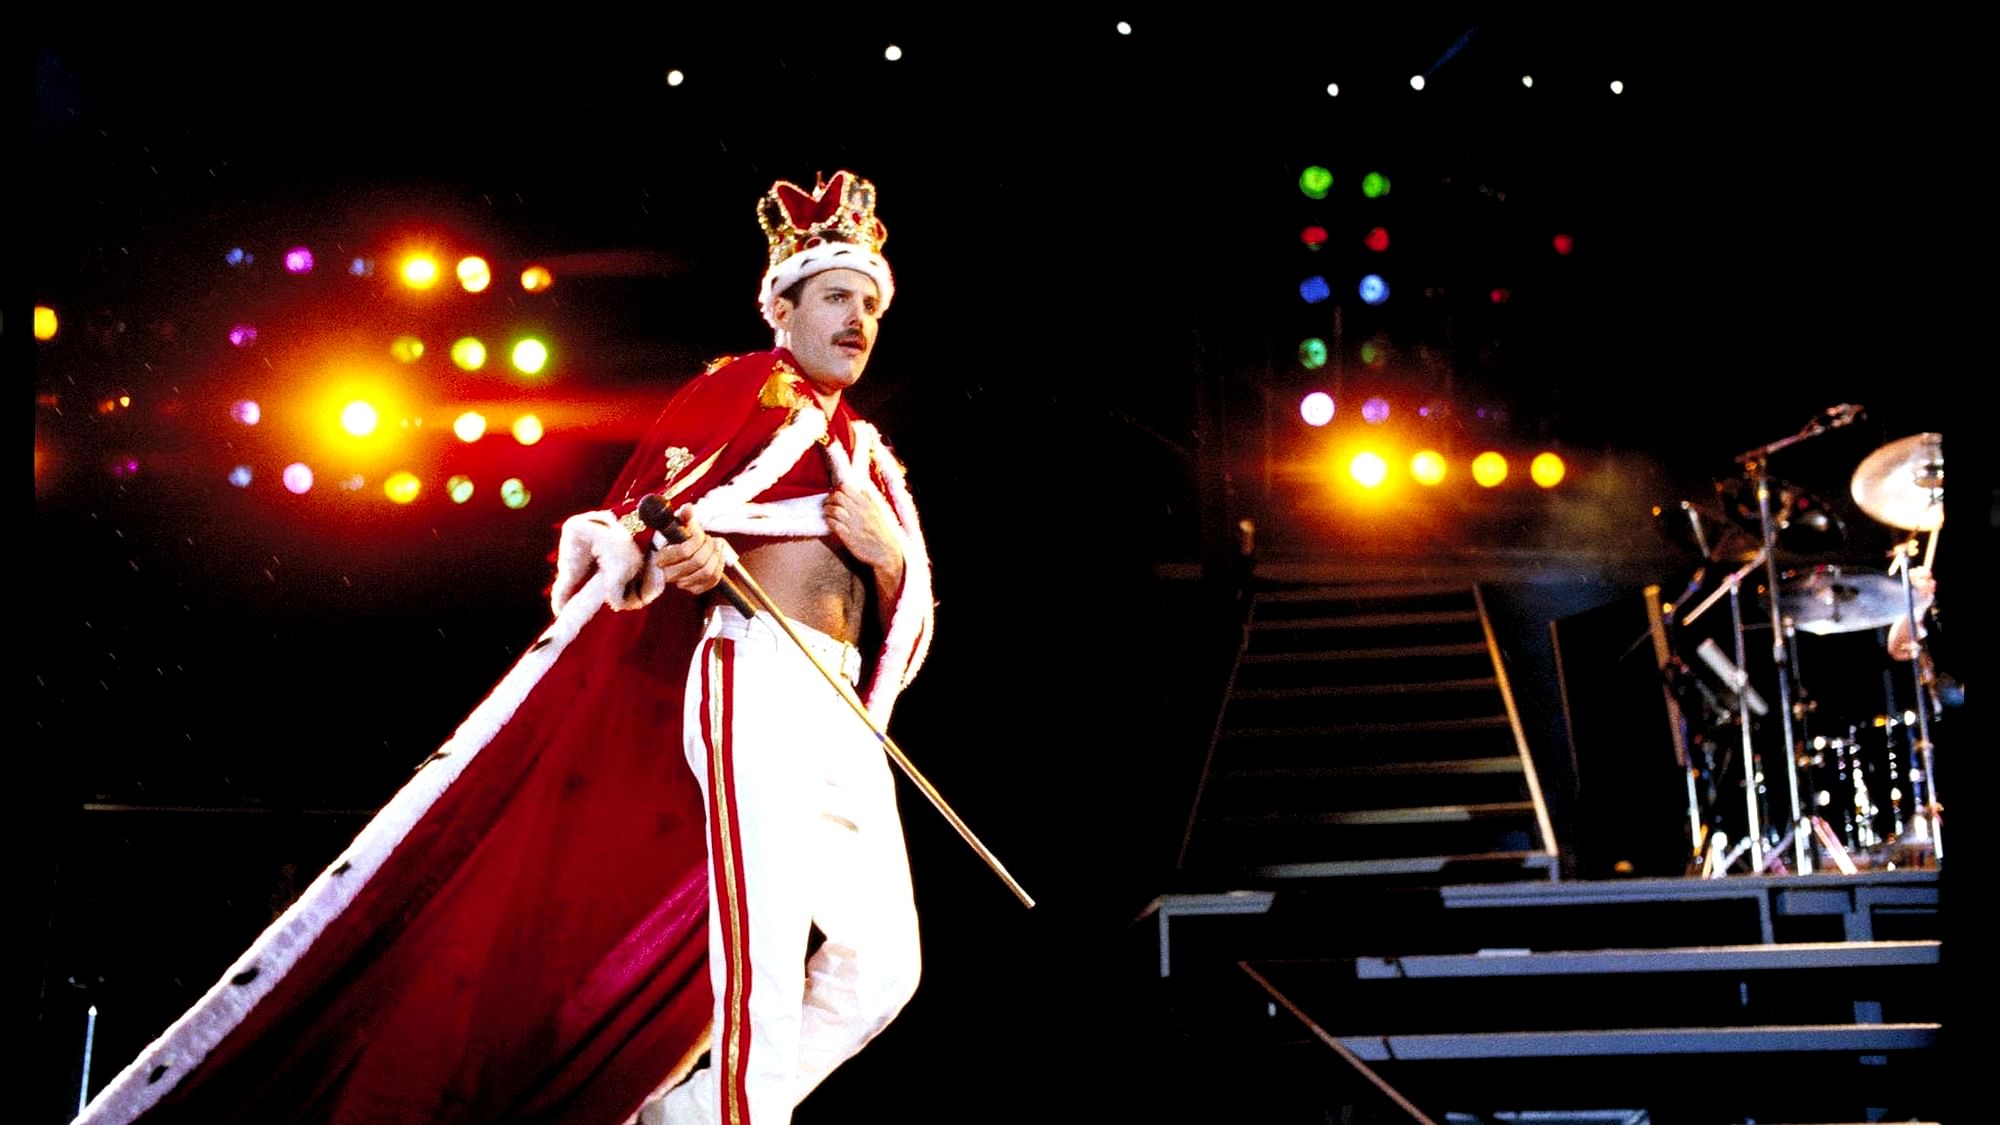 An ode to Queen front man Freddie Mercury on his 70th birth anniversary